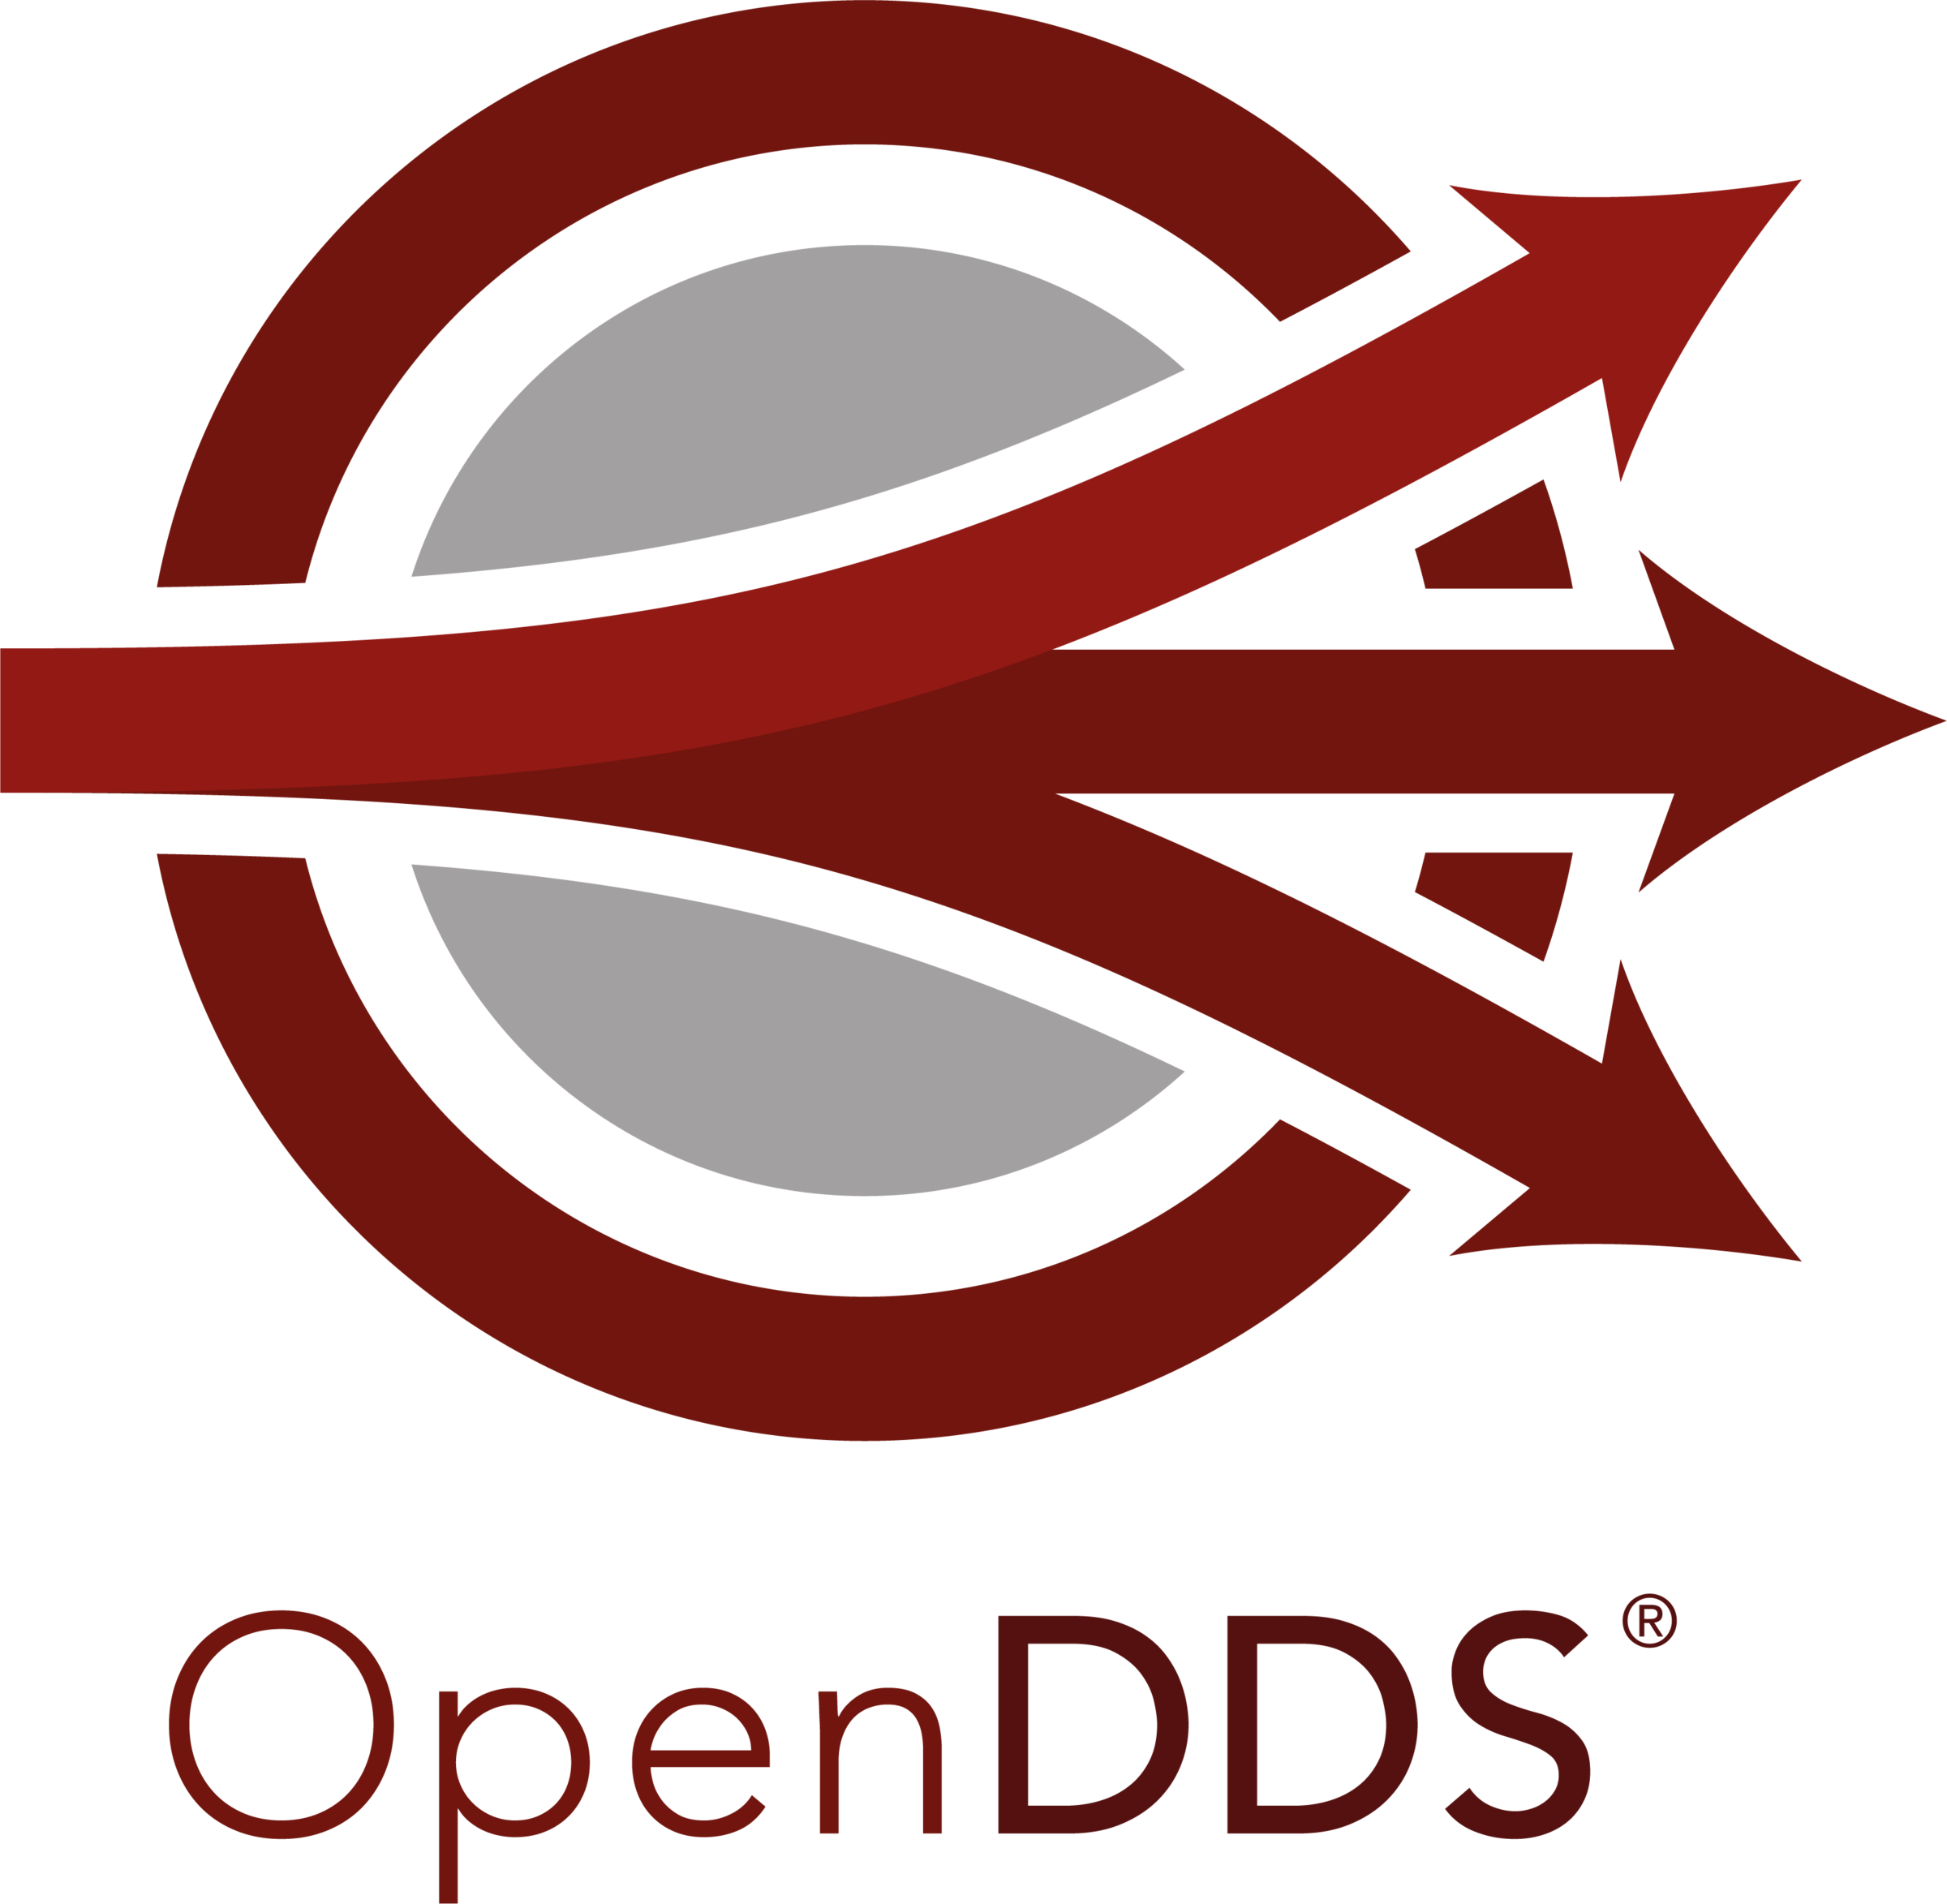 The OpenDDS Project News Page